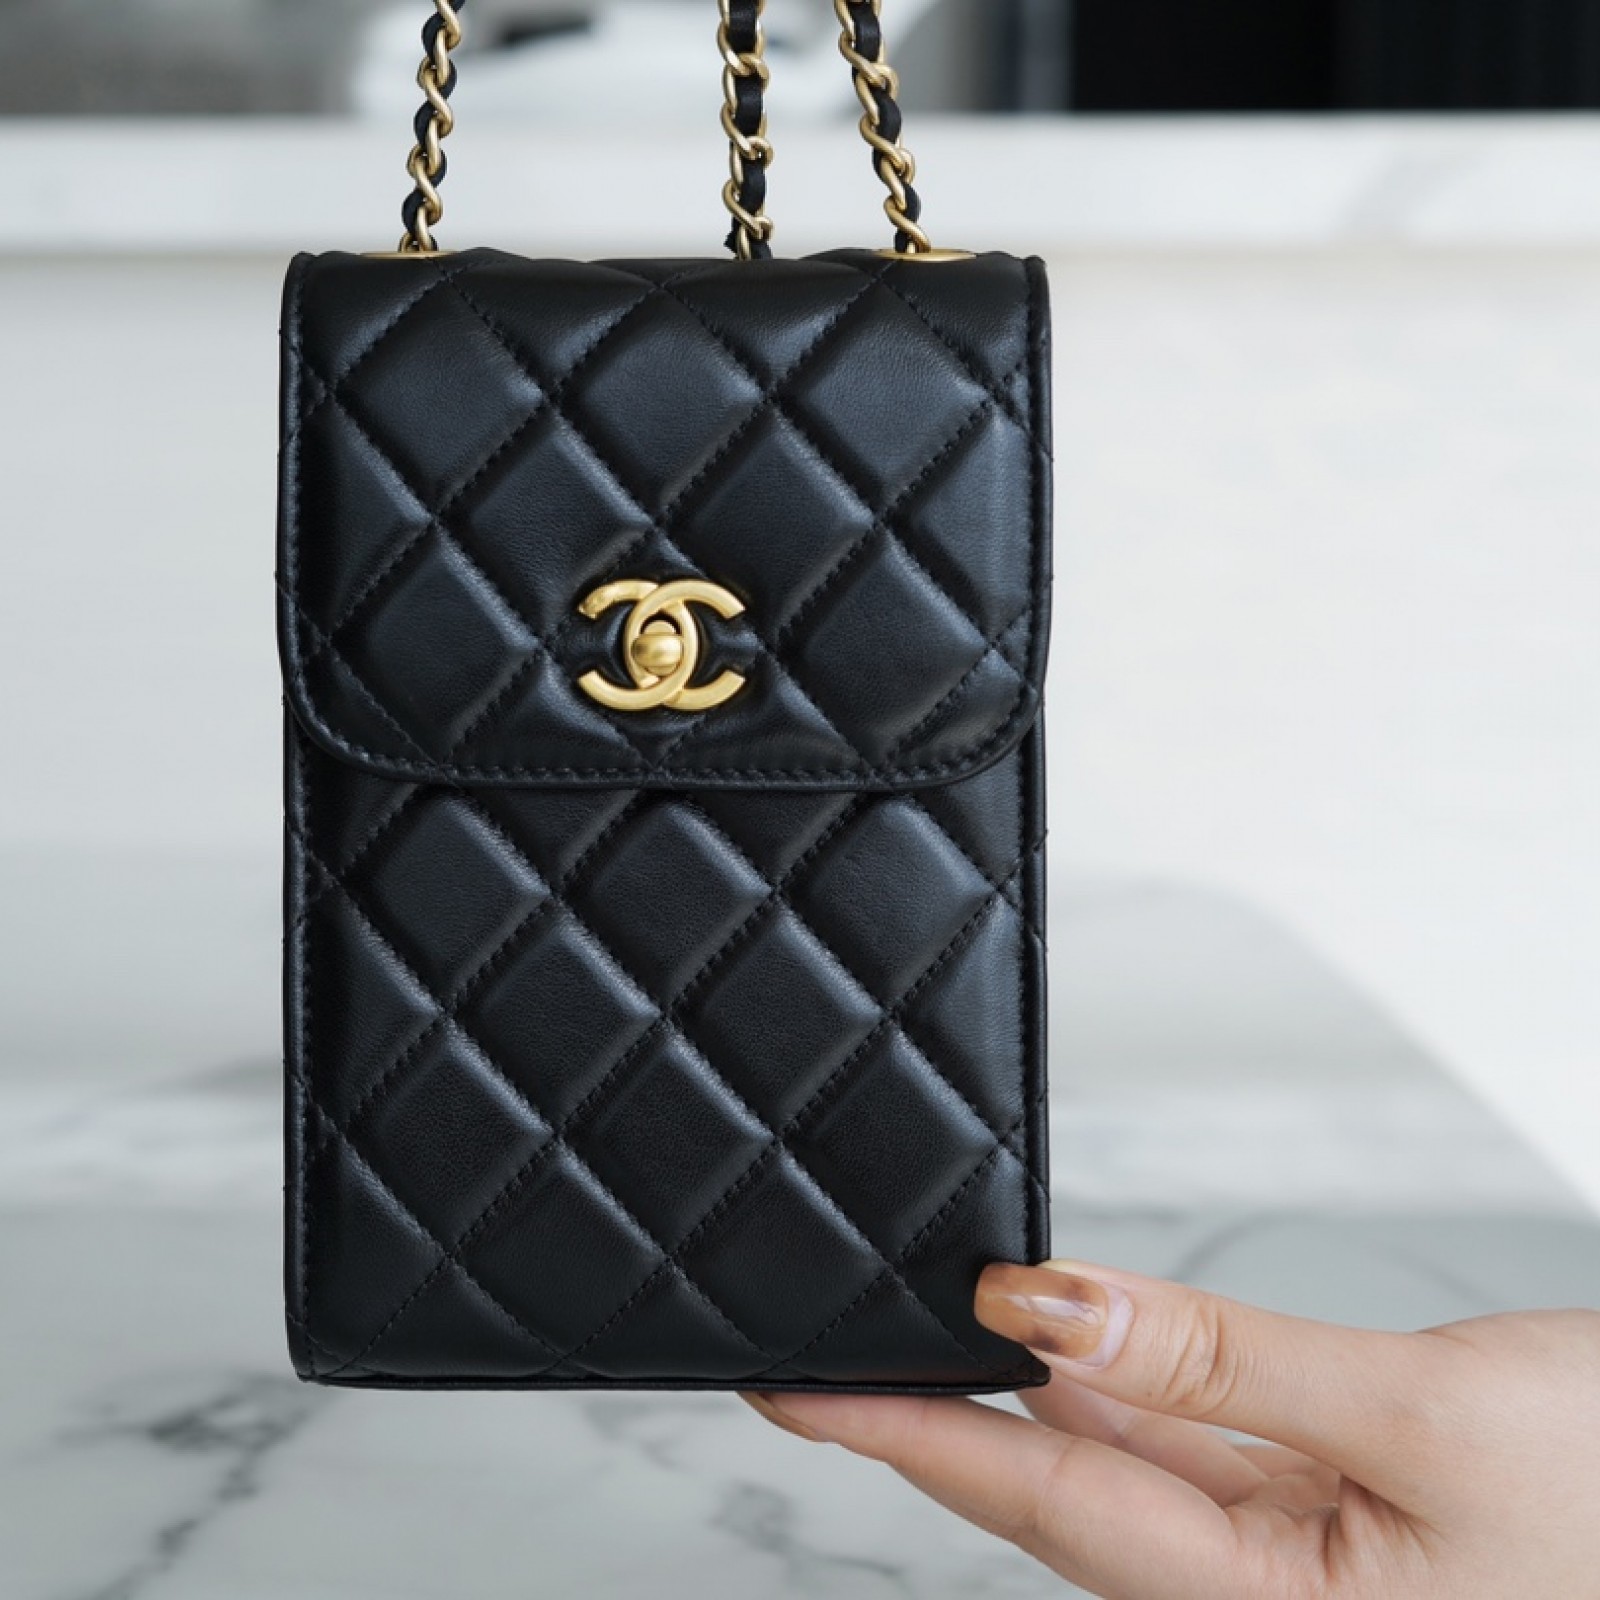 CHANEL PEARL CRUSH PHONE HOLDER WITH CHAIN BAG